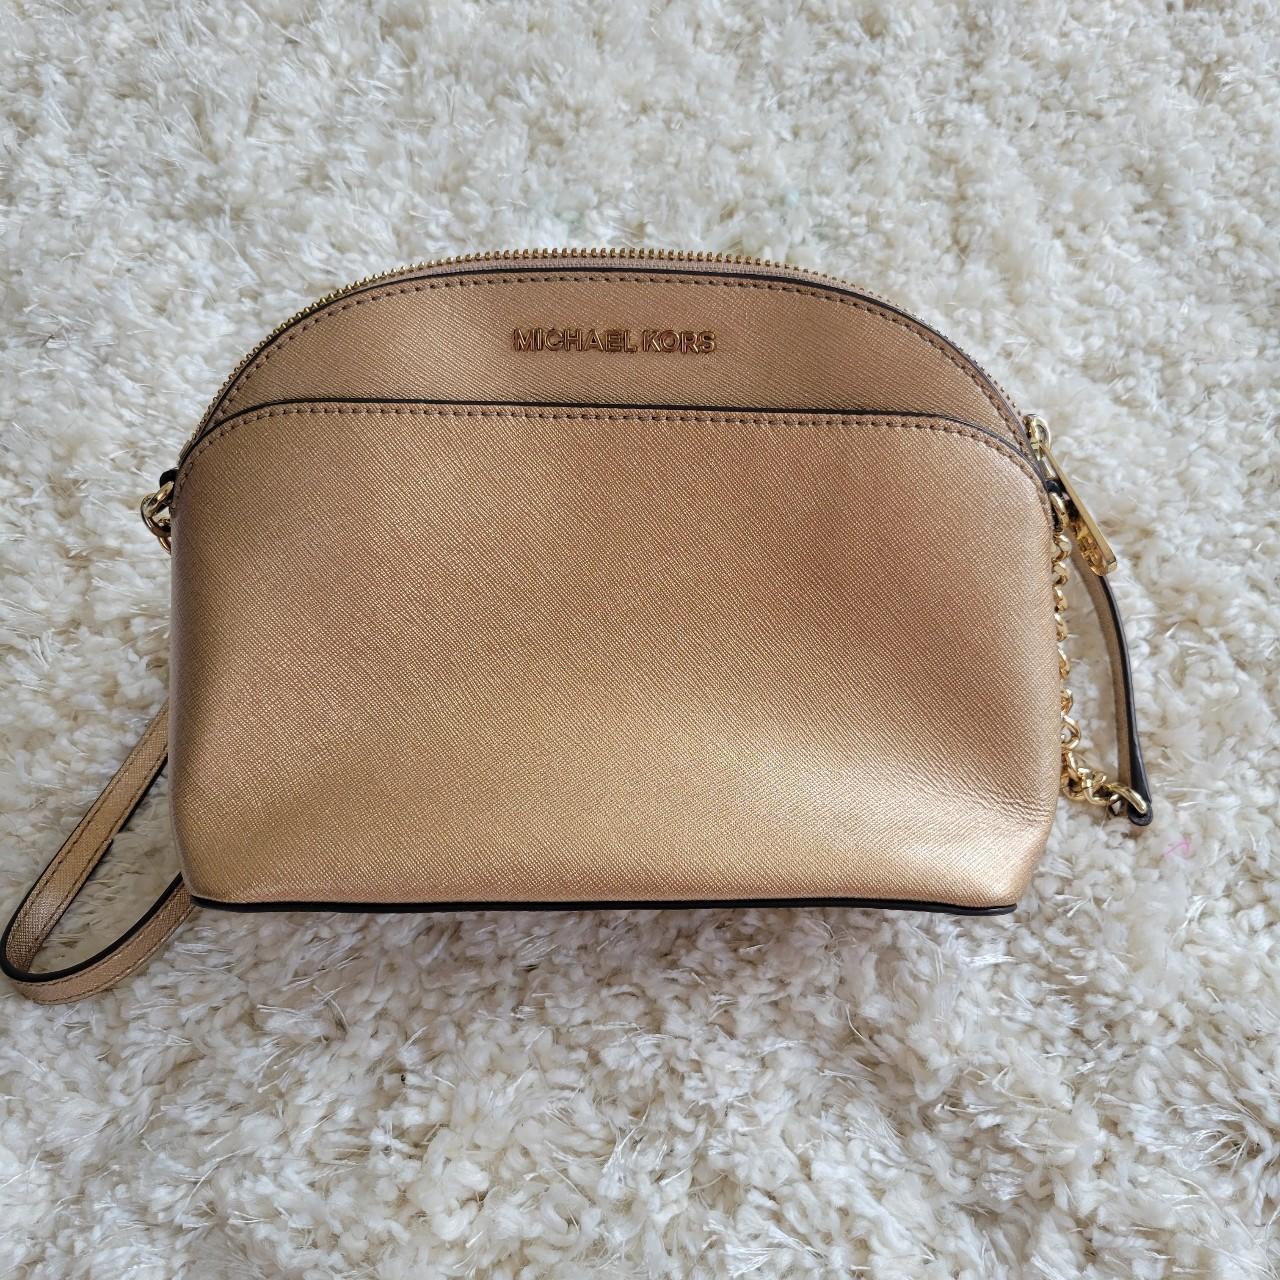 Michael Kors Large Cindy Dome Crossbody Bag in Rose Gold - Luxe Purses